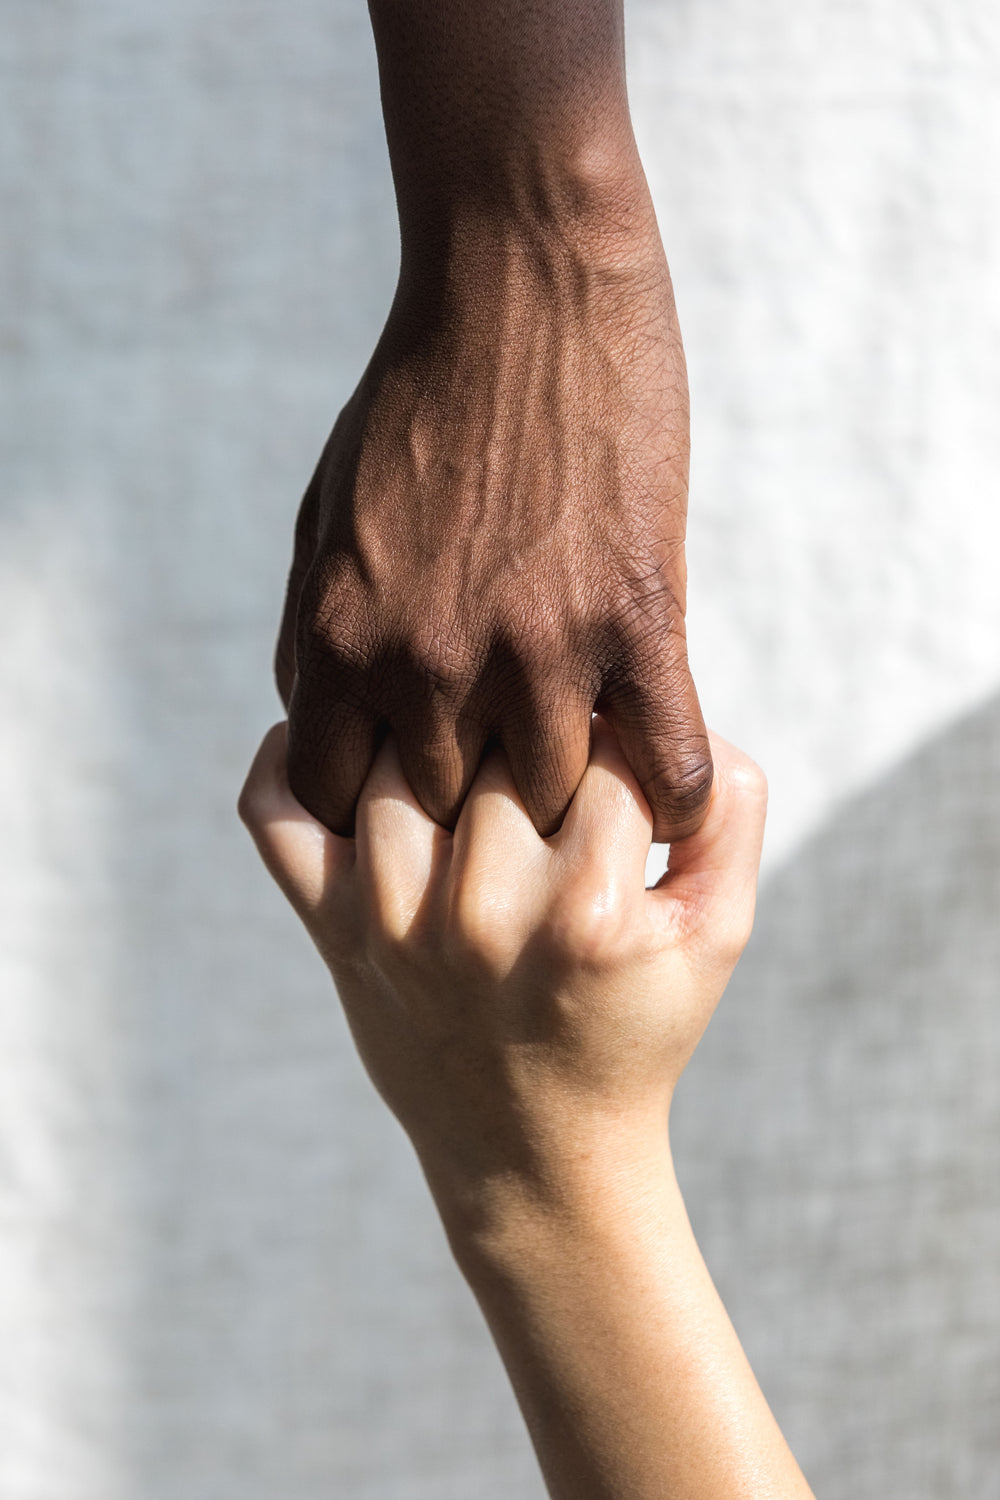 two hands grasping each other in solidarity